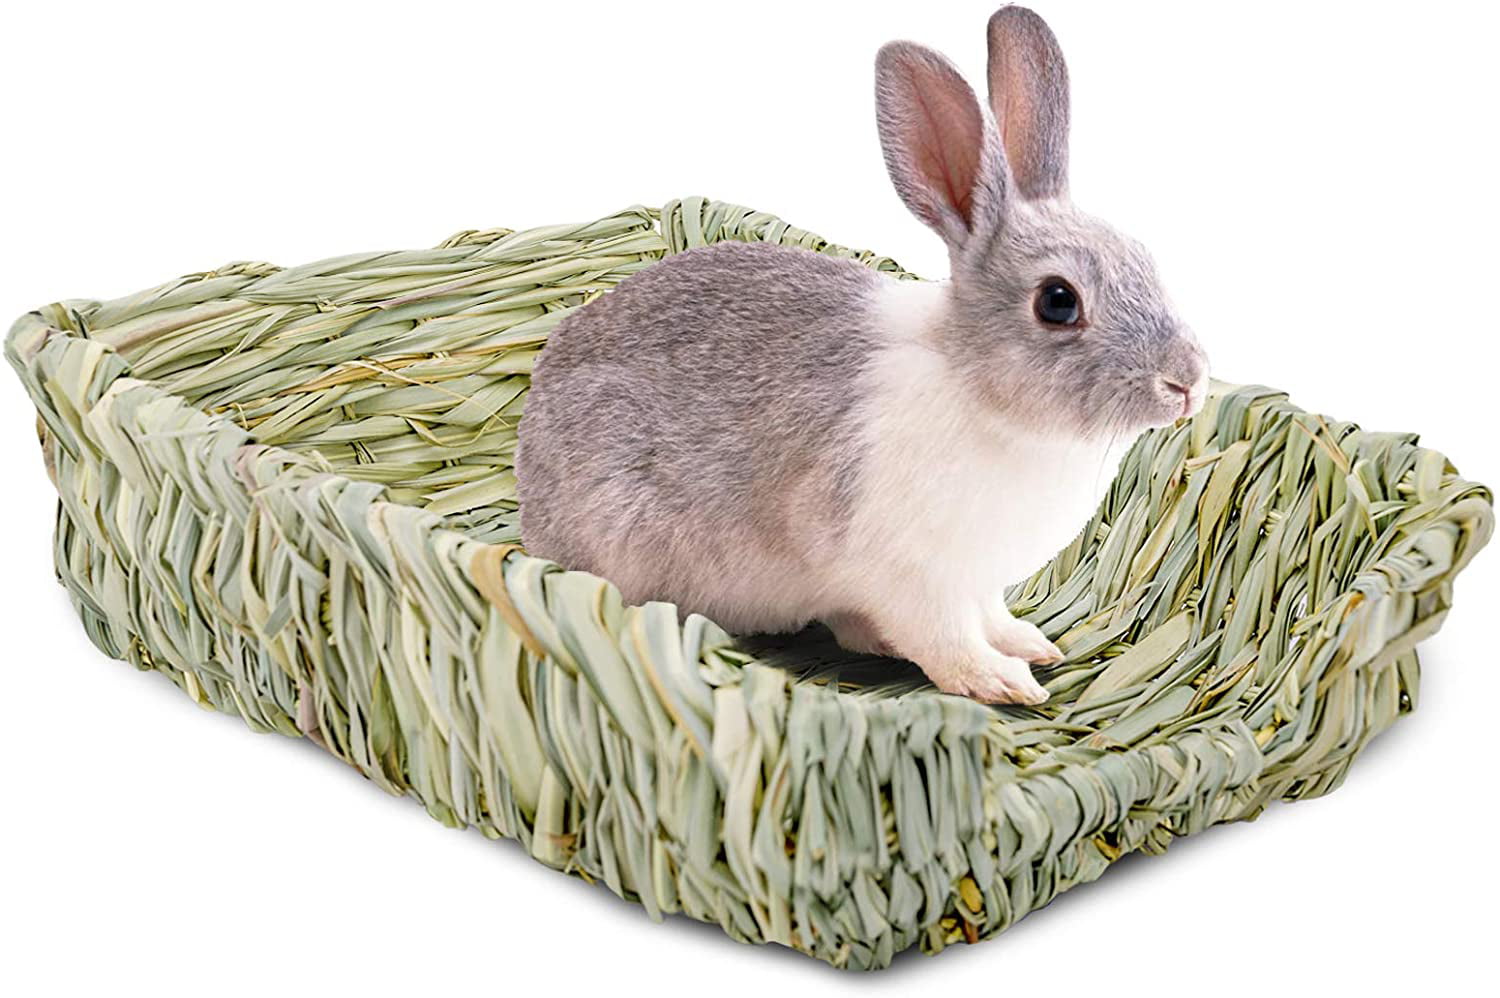 Pet Woven Grass Straw Rabbit Hamster Cage Nest House Chew Toy Hedgehog Bed 